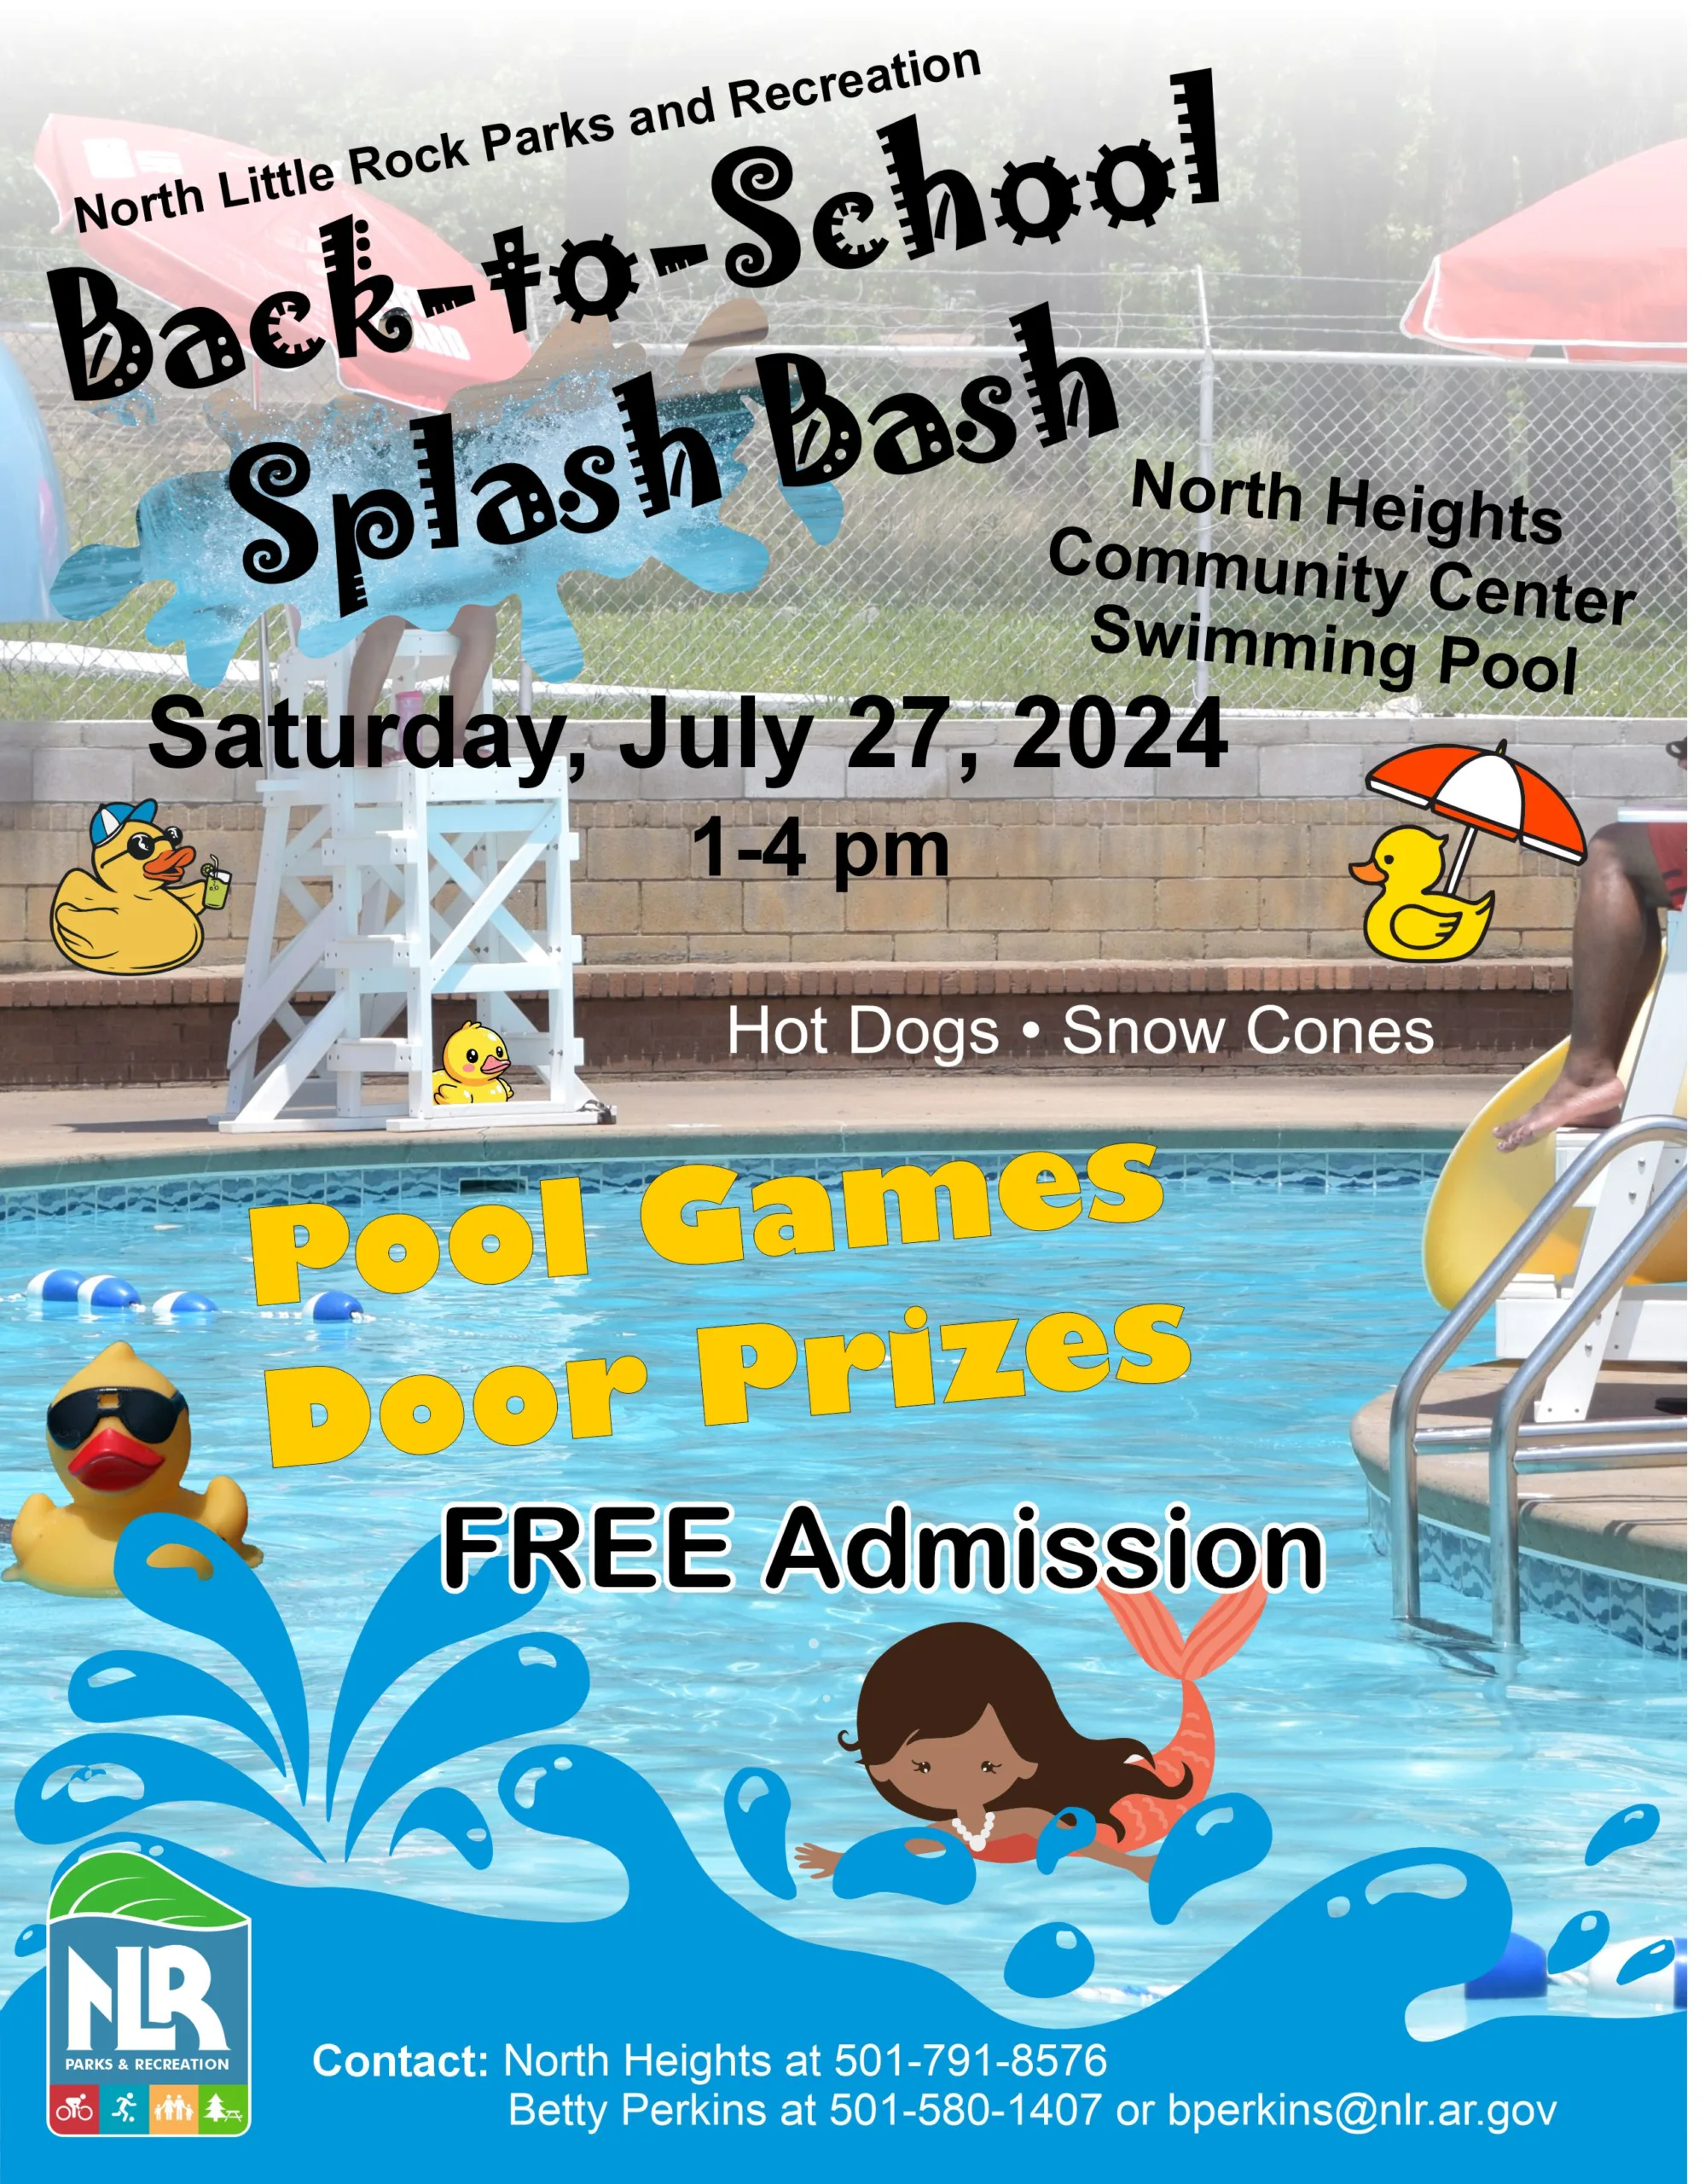 image of pool and event information